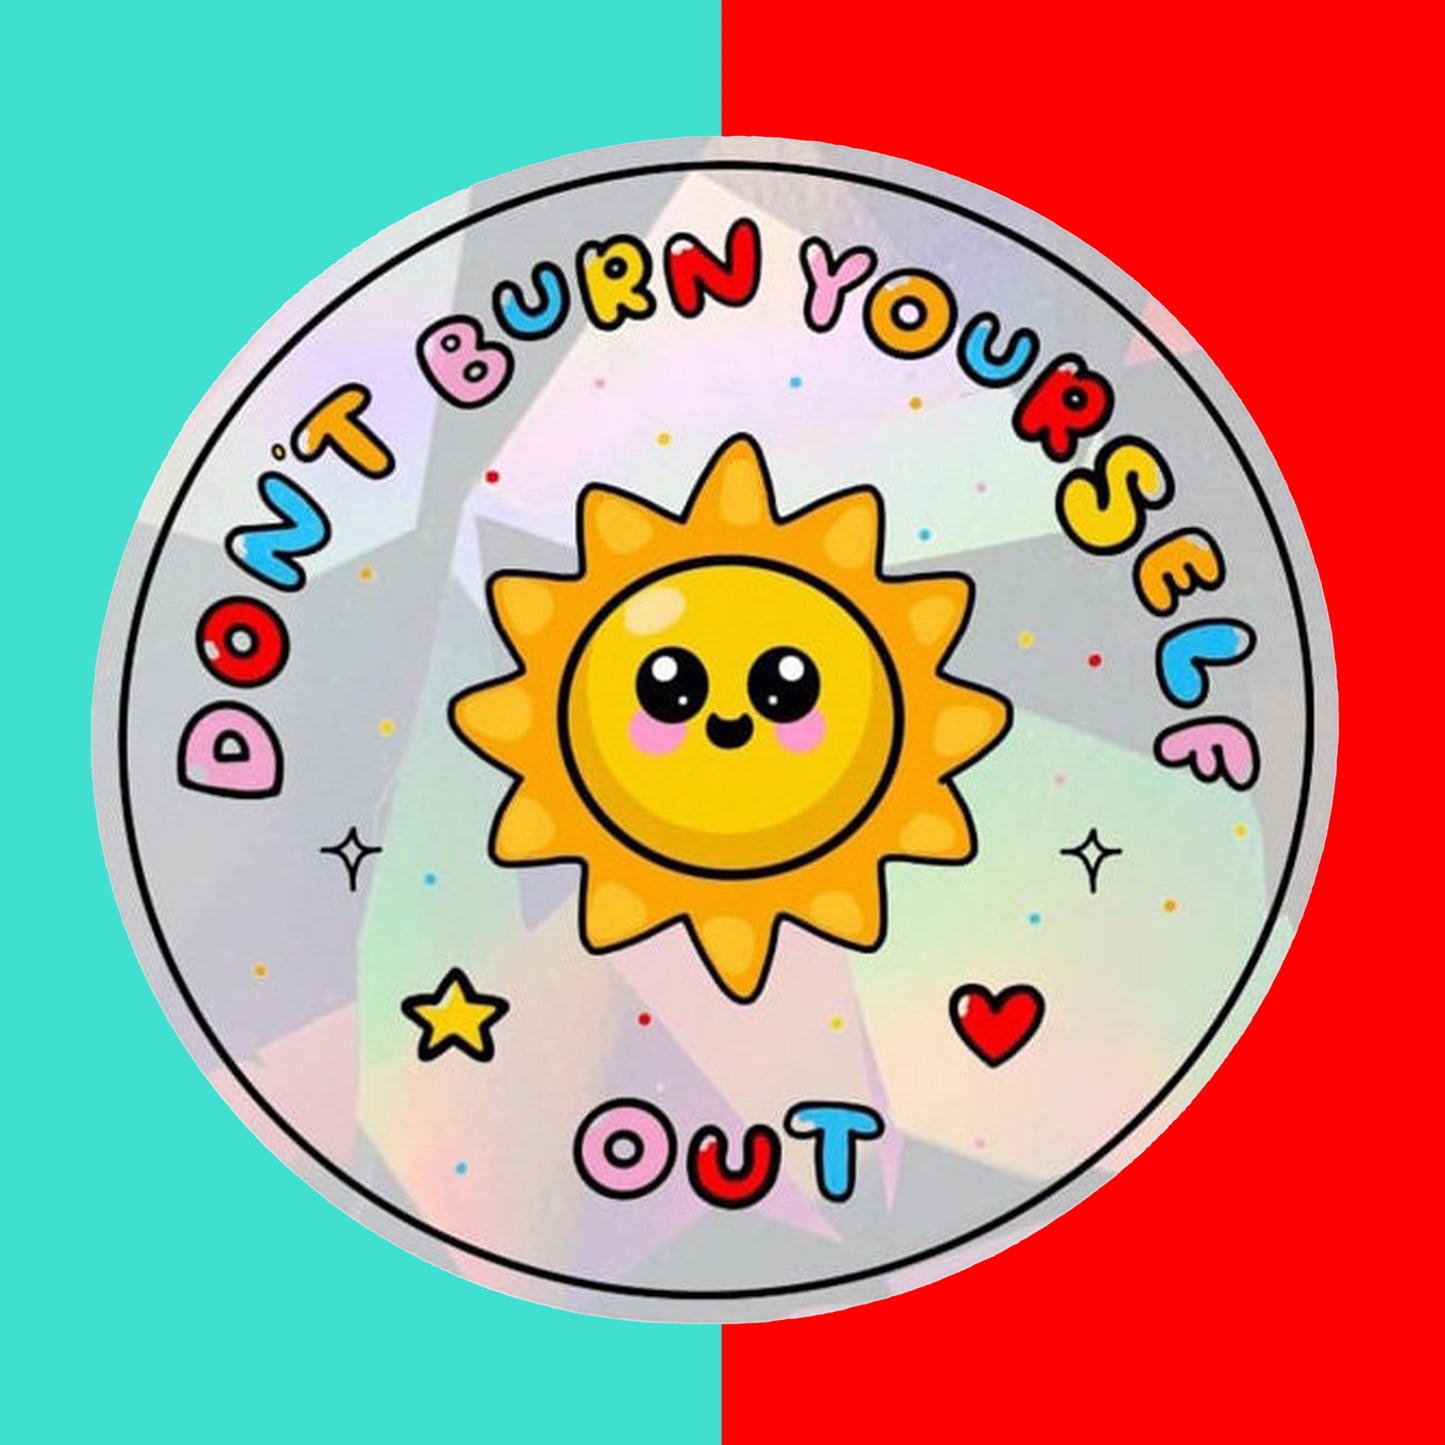 Don't Burn Yourself Out Suncatcher Sticker Window Decal, Holographic Rainbow Maker